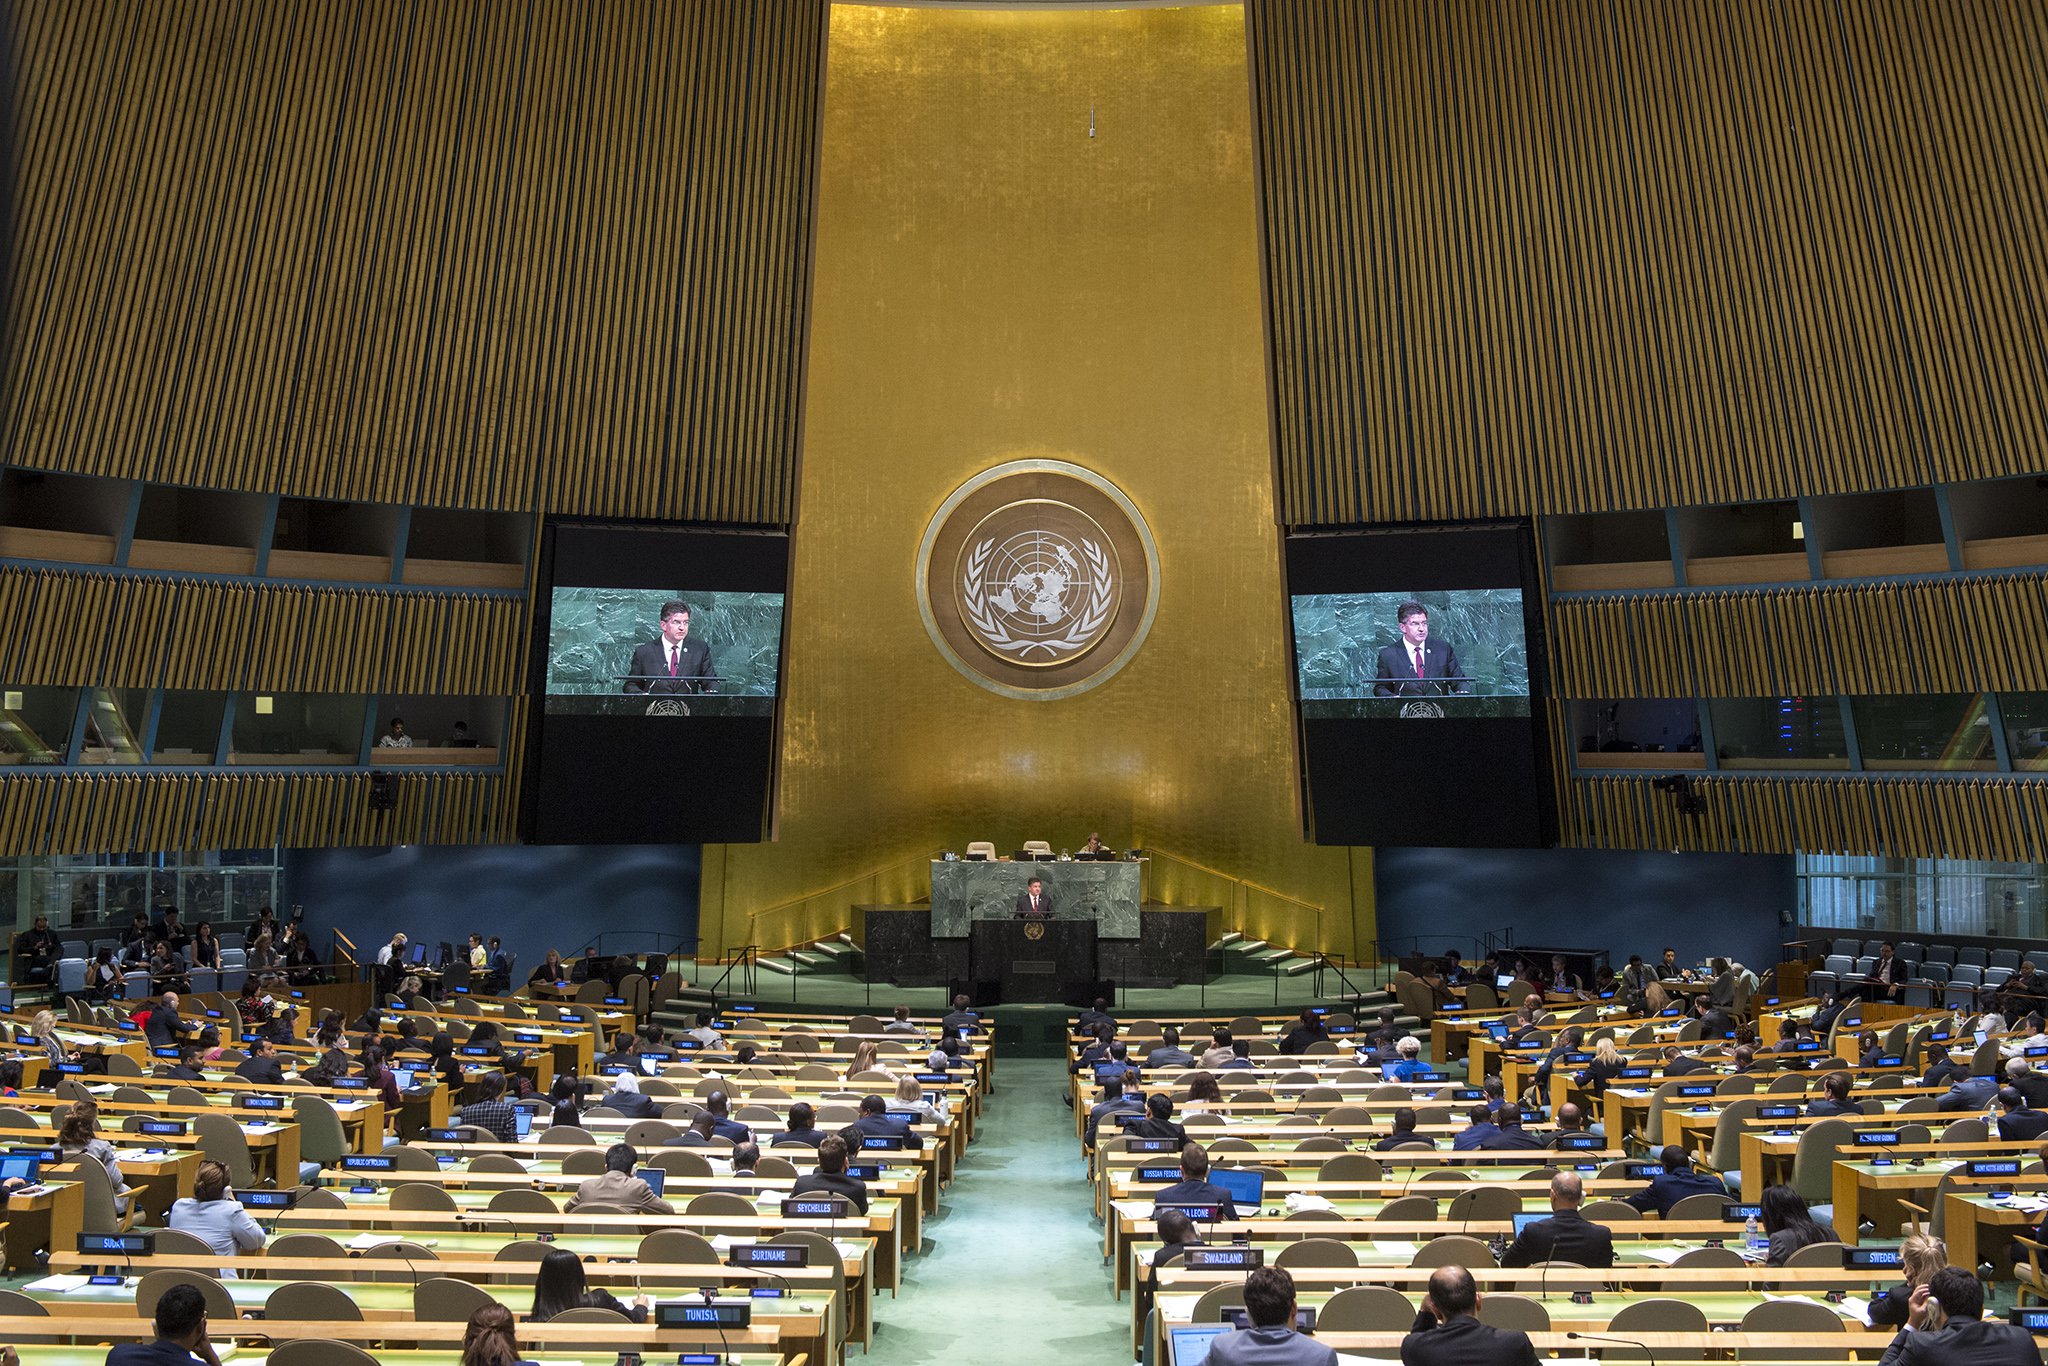 Seventy-second session of the General Assembly. Photo: UN Photo/Cia Pak CC-BY-NC-ND 2.0